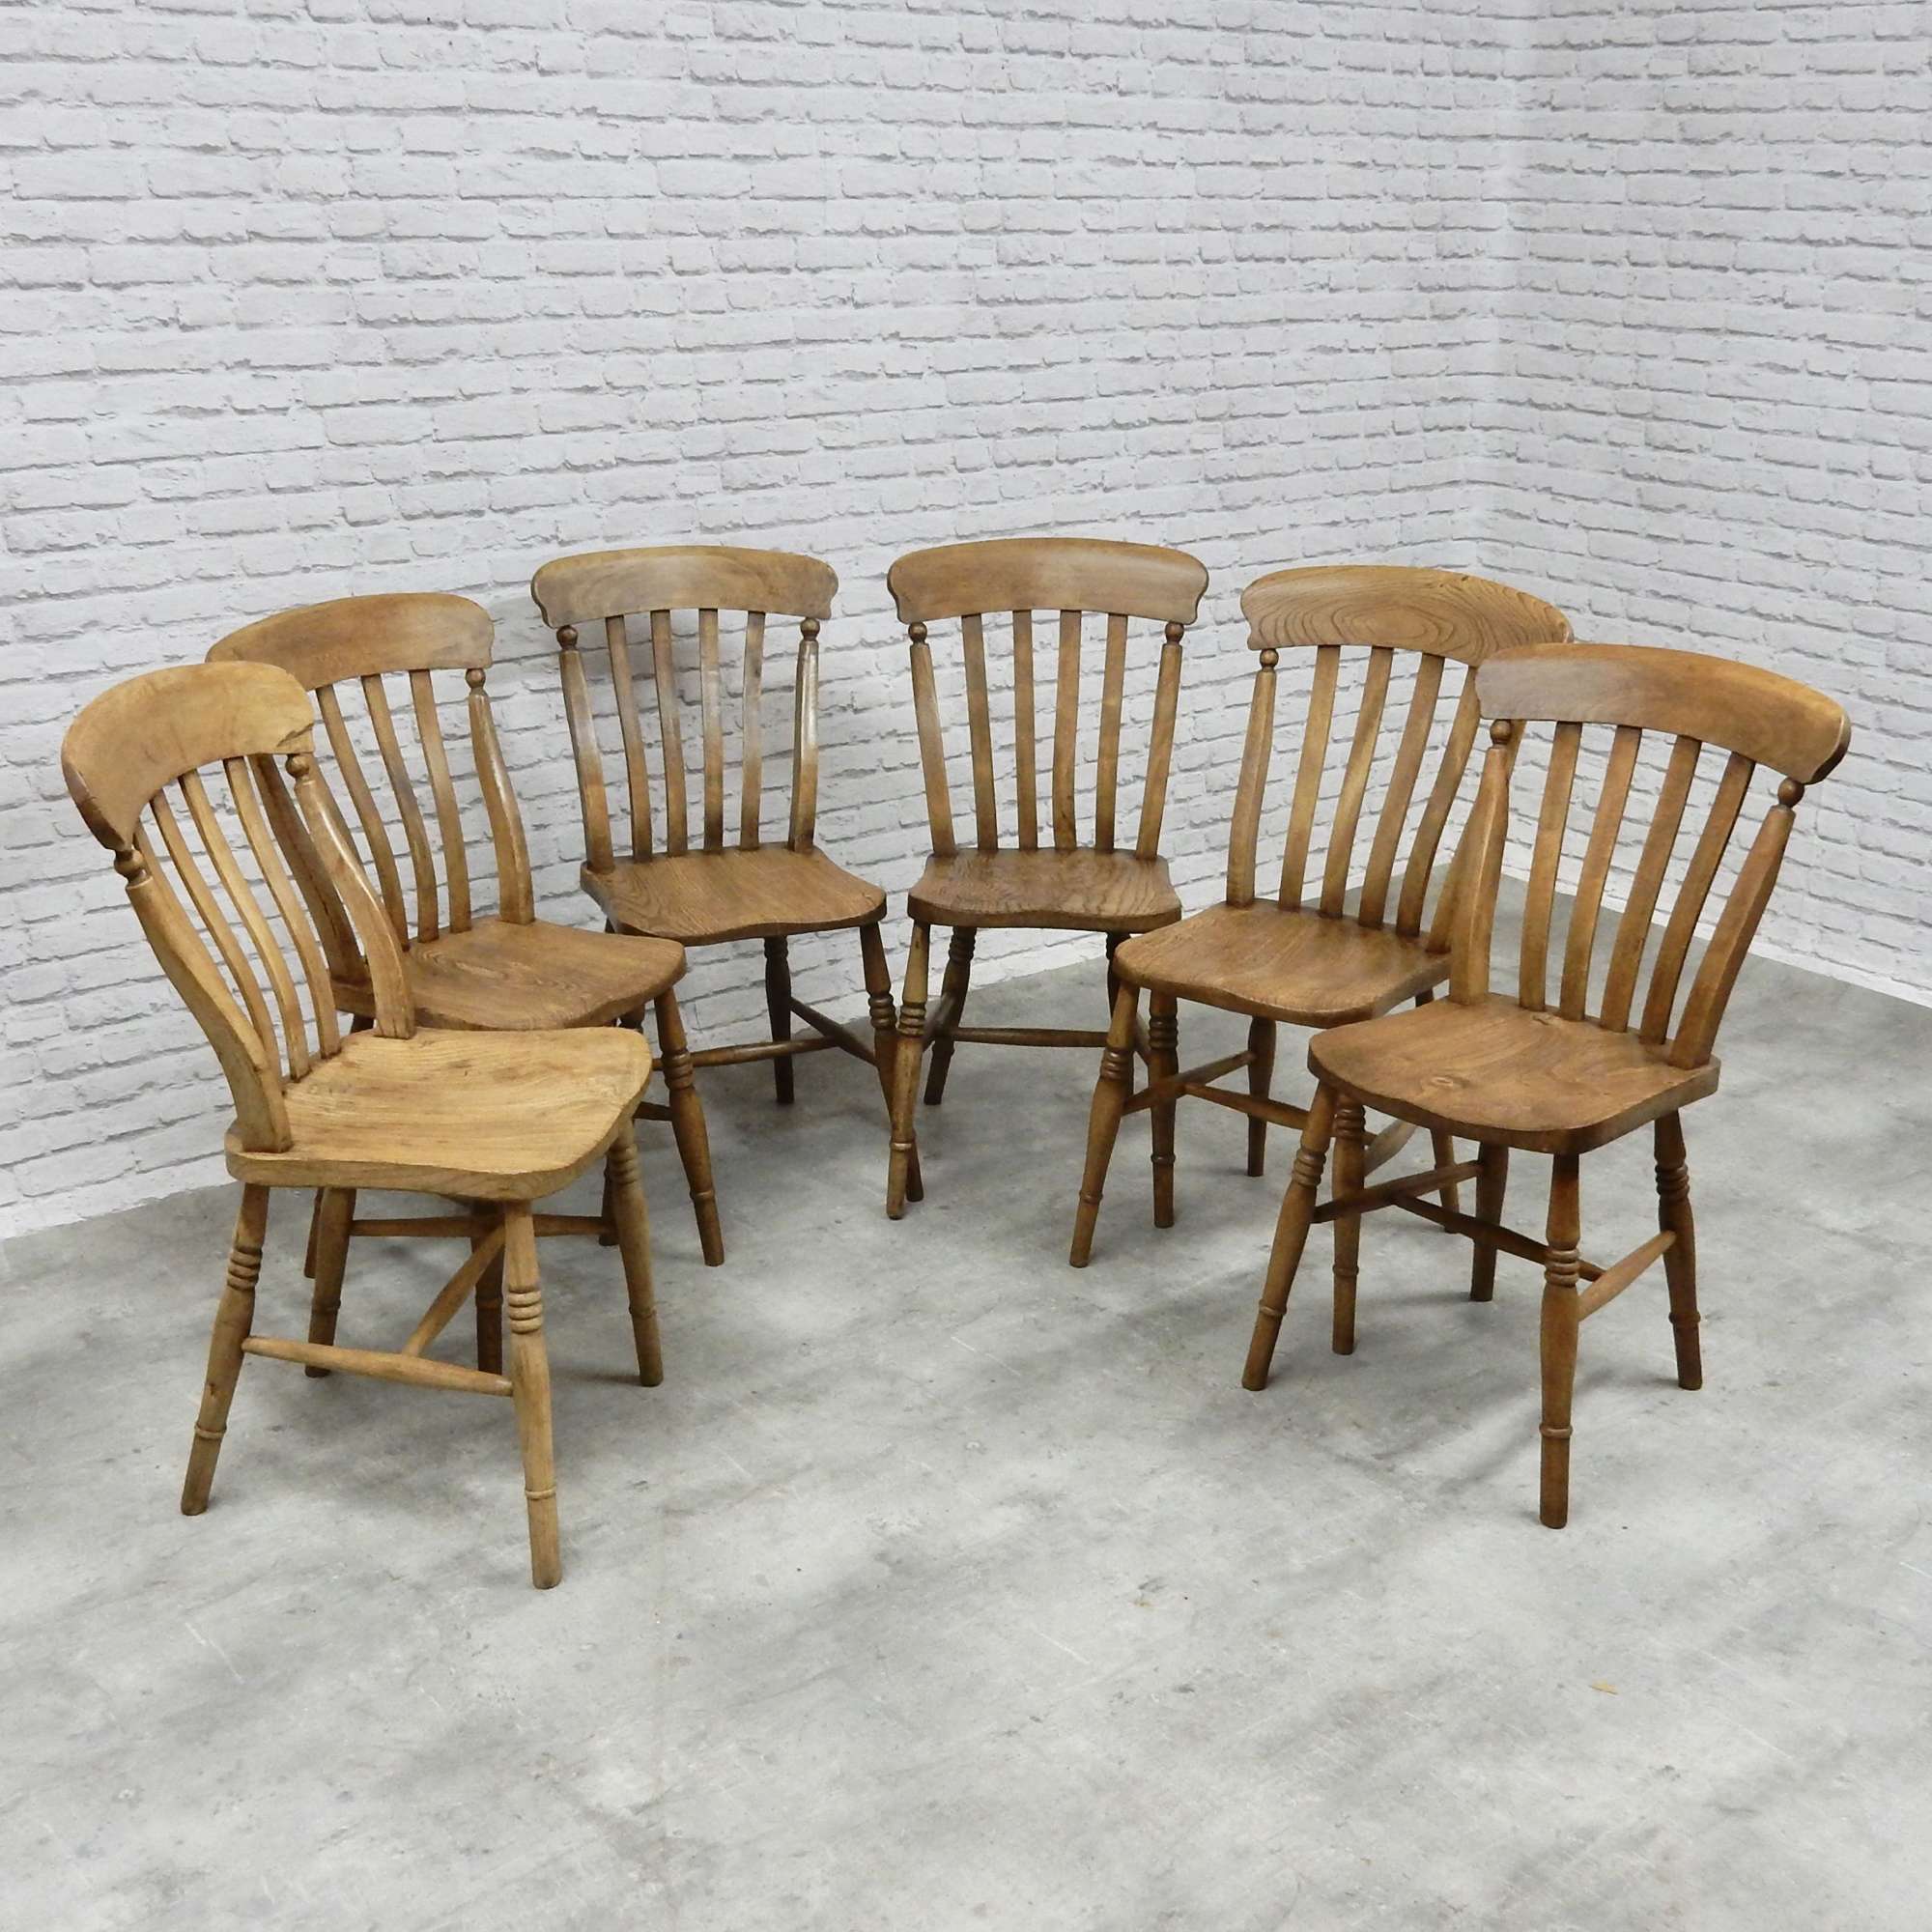 C19th Windsor Kitchen Chairs